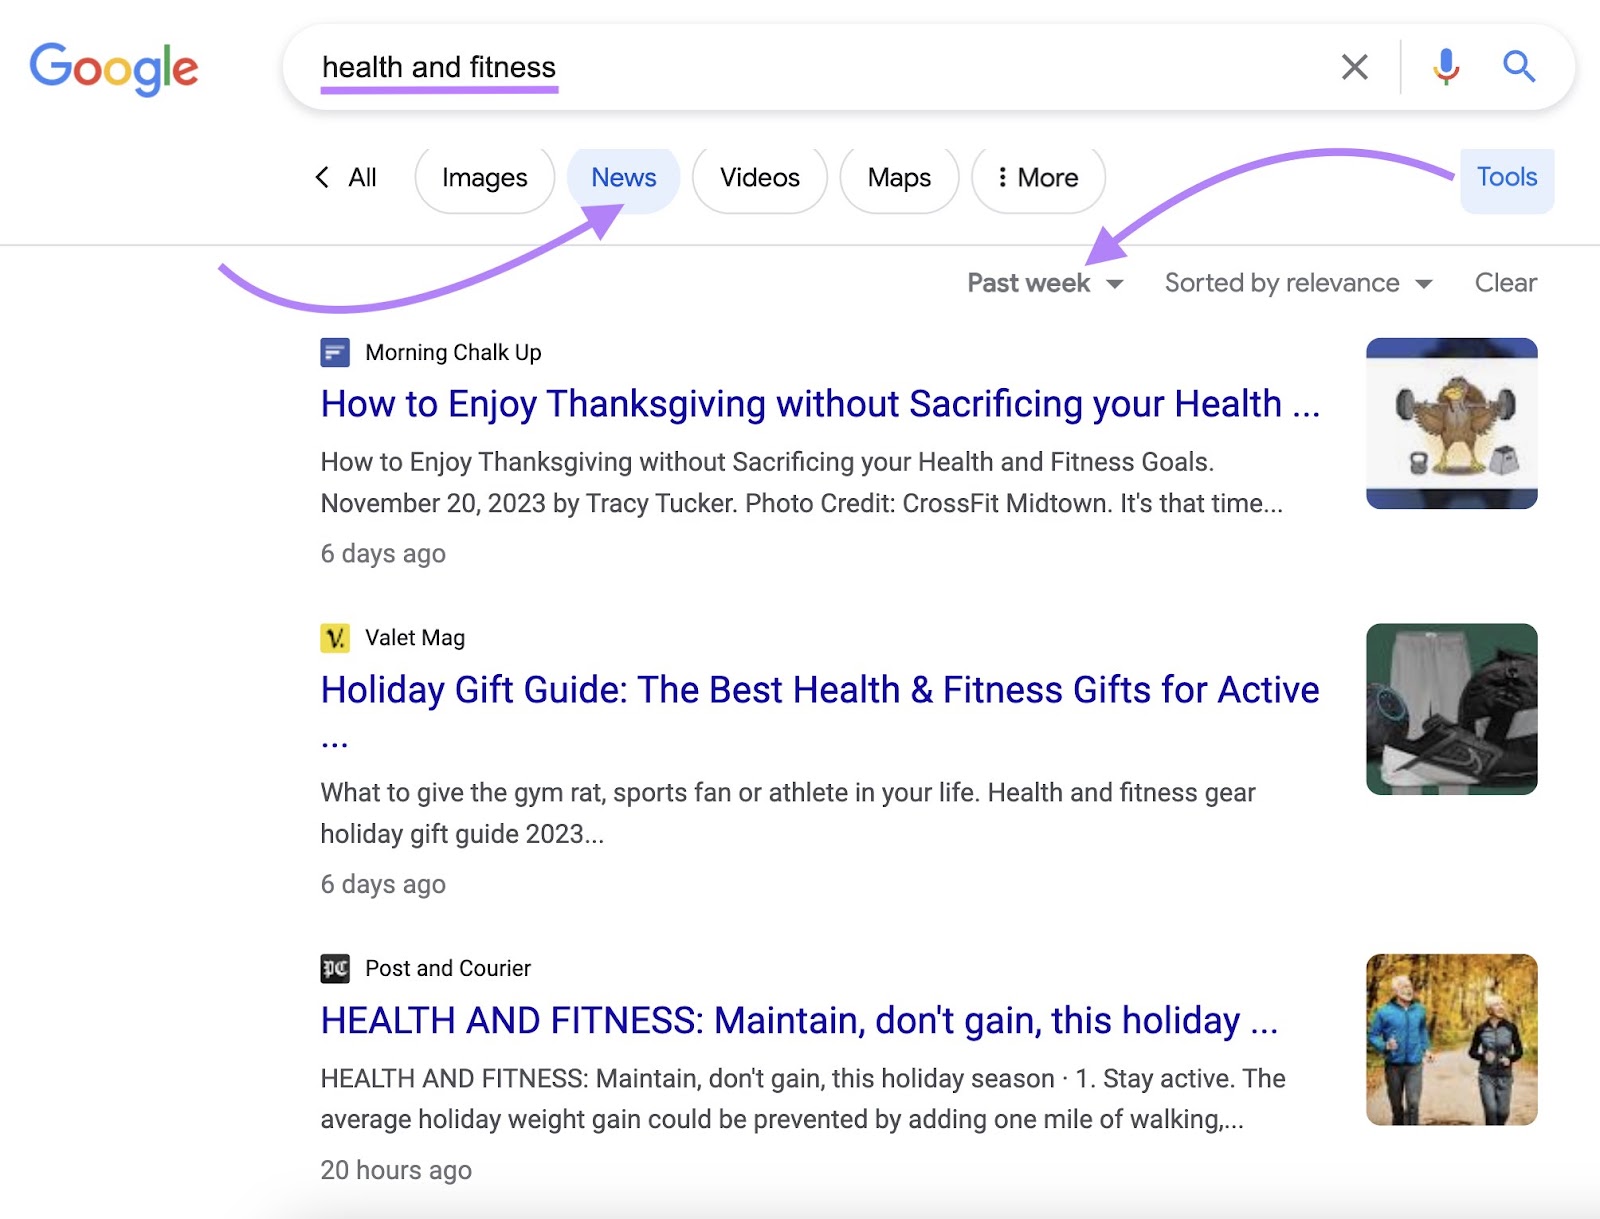 “News" selected under "health and fitness" search in Google